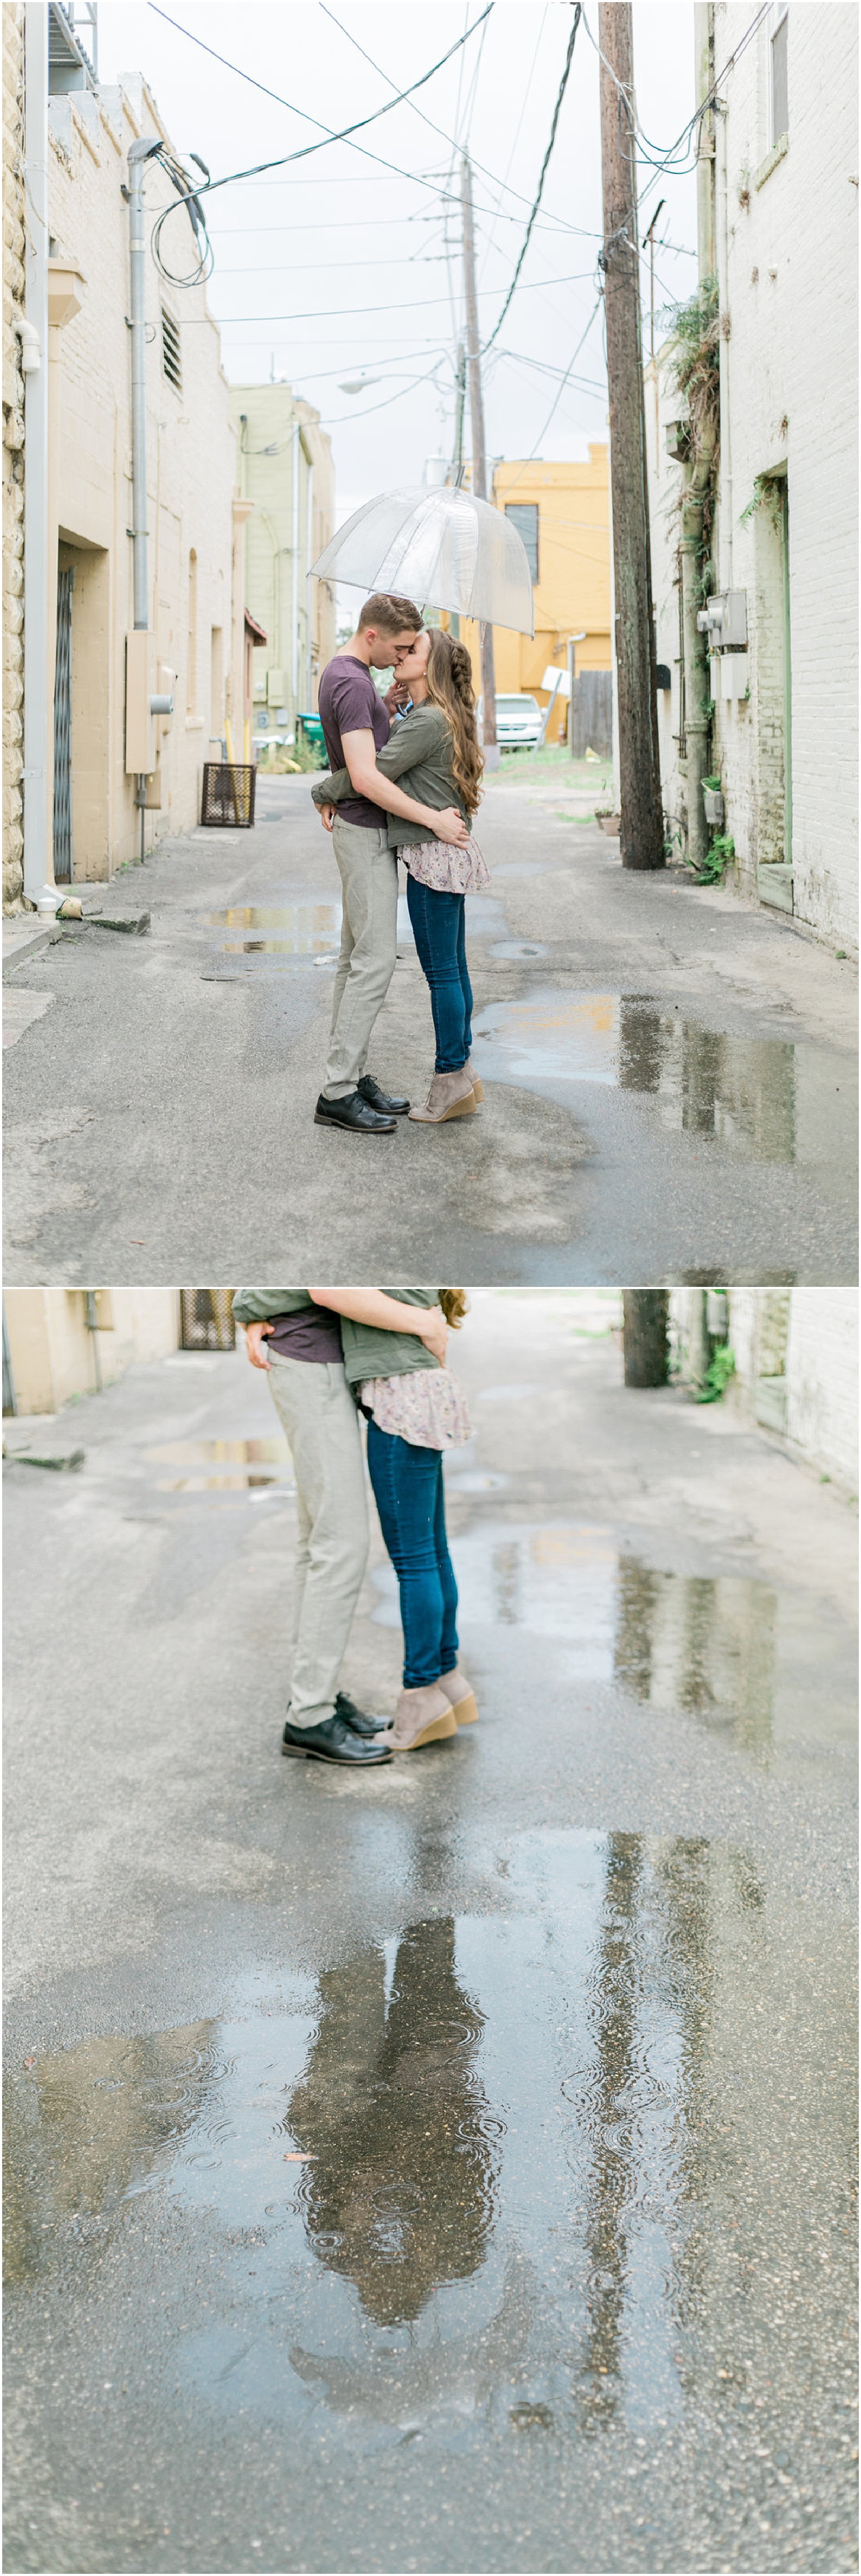 Engaged couple kissing in the middle of an alleyway.